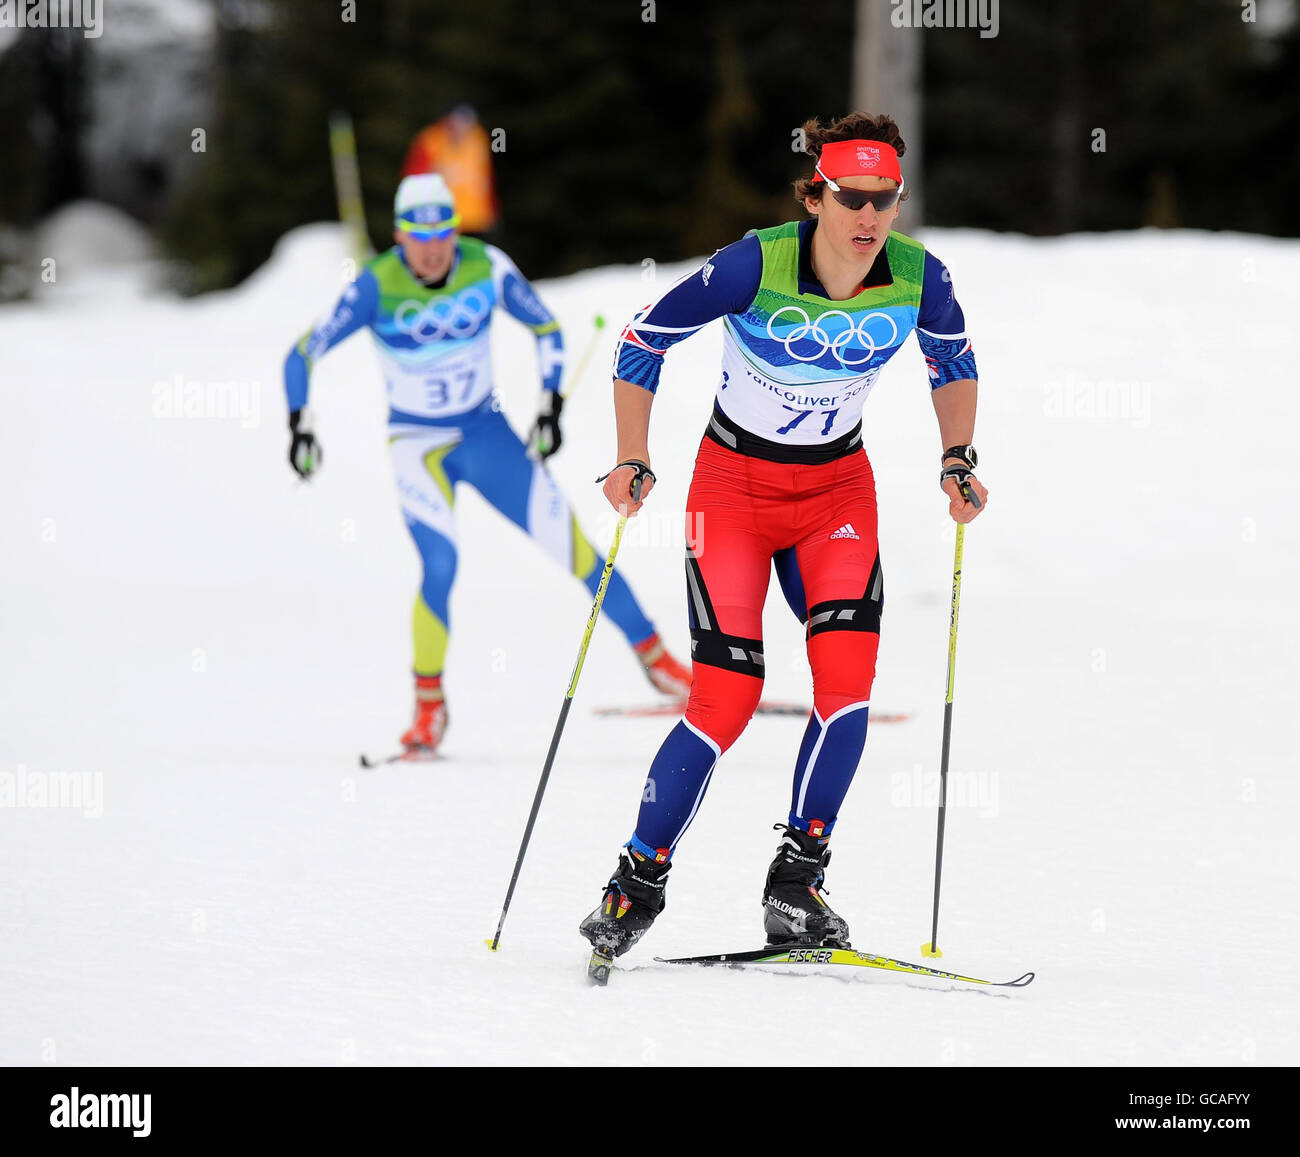 Great Britain's Andrew Young in action in the Men's 15km Free Cross Country  Skiing at Whistler Olympic Park, Whistler, Canada Stock Photo - Alamy